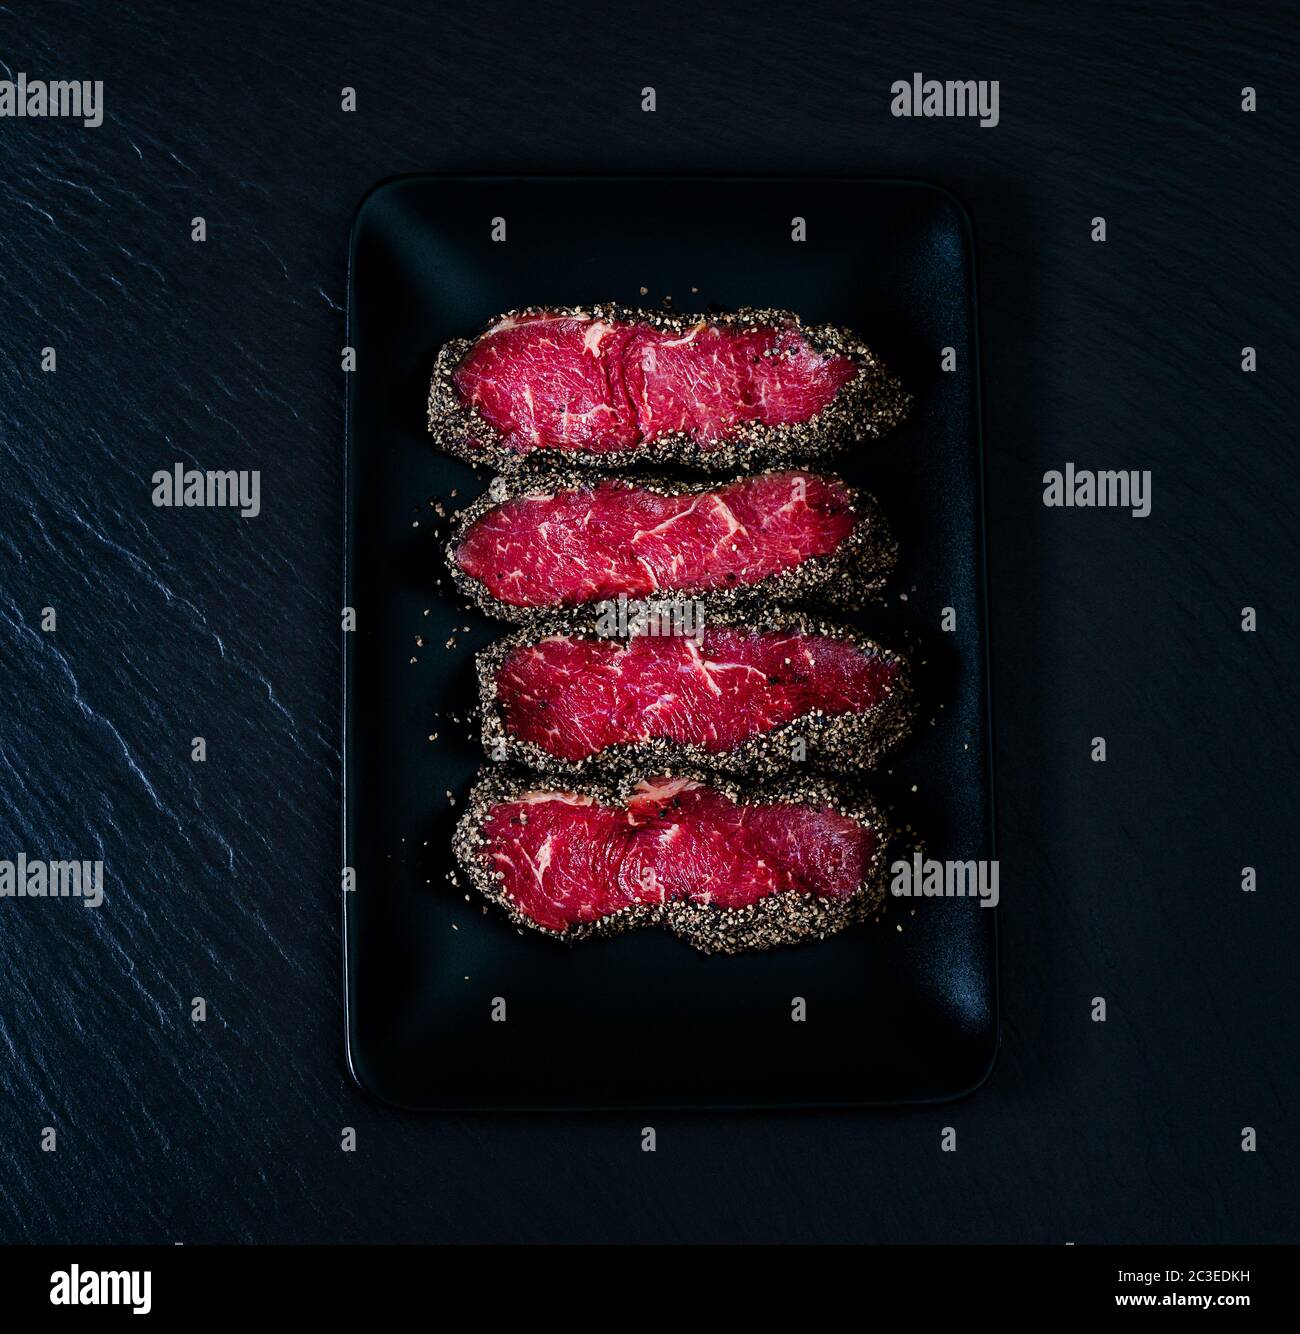 Top view on pepper steaks on black stone plate Stock Photo